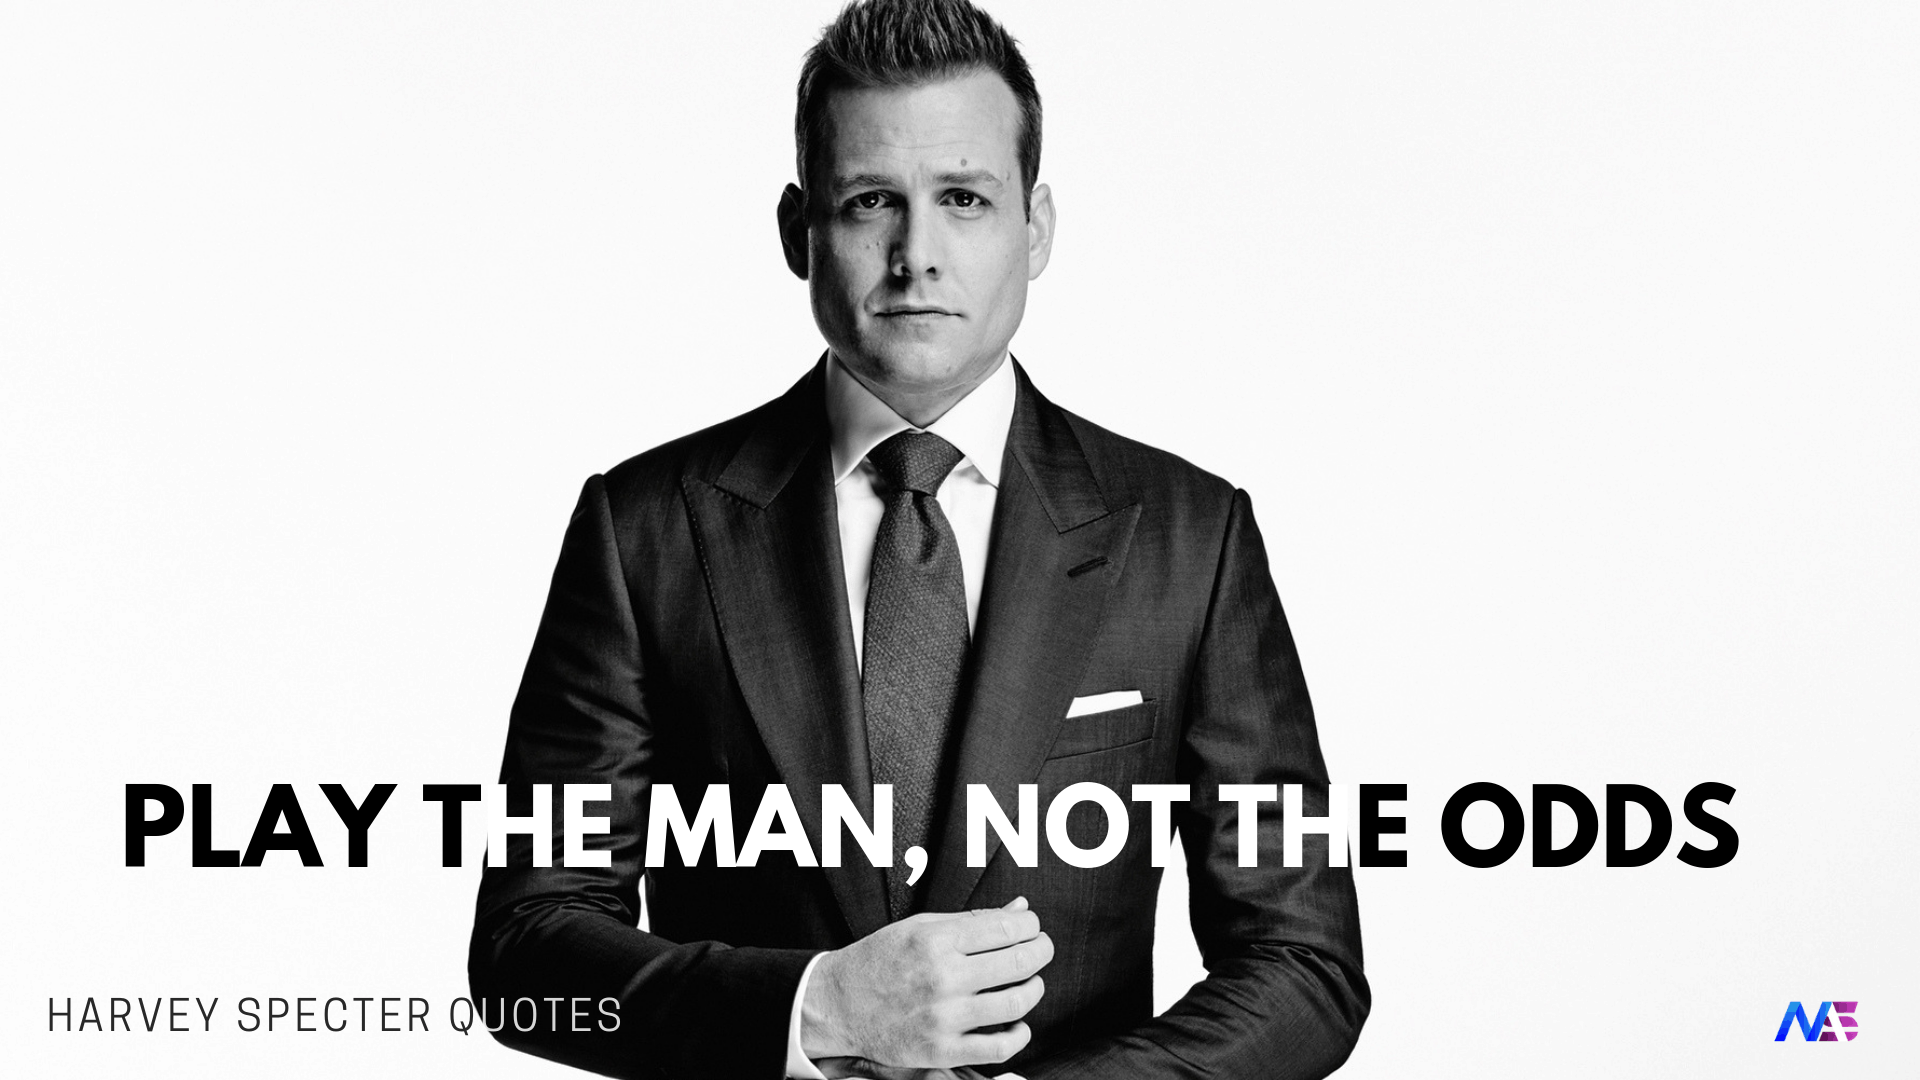 Play the man, not the odds 27 Witty & Badass Harvey Specter Quotes That Will Motivate You. Harvey specter quotes, Harvey specter, Suits quotes harvey